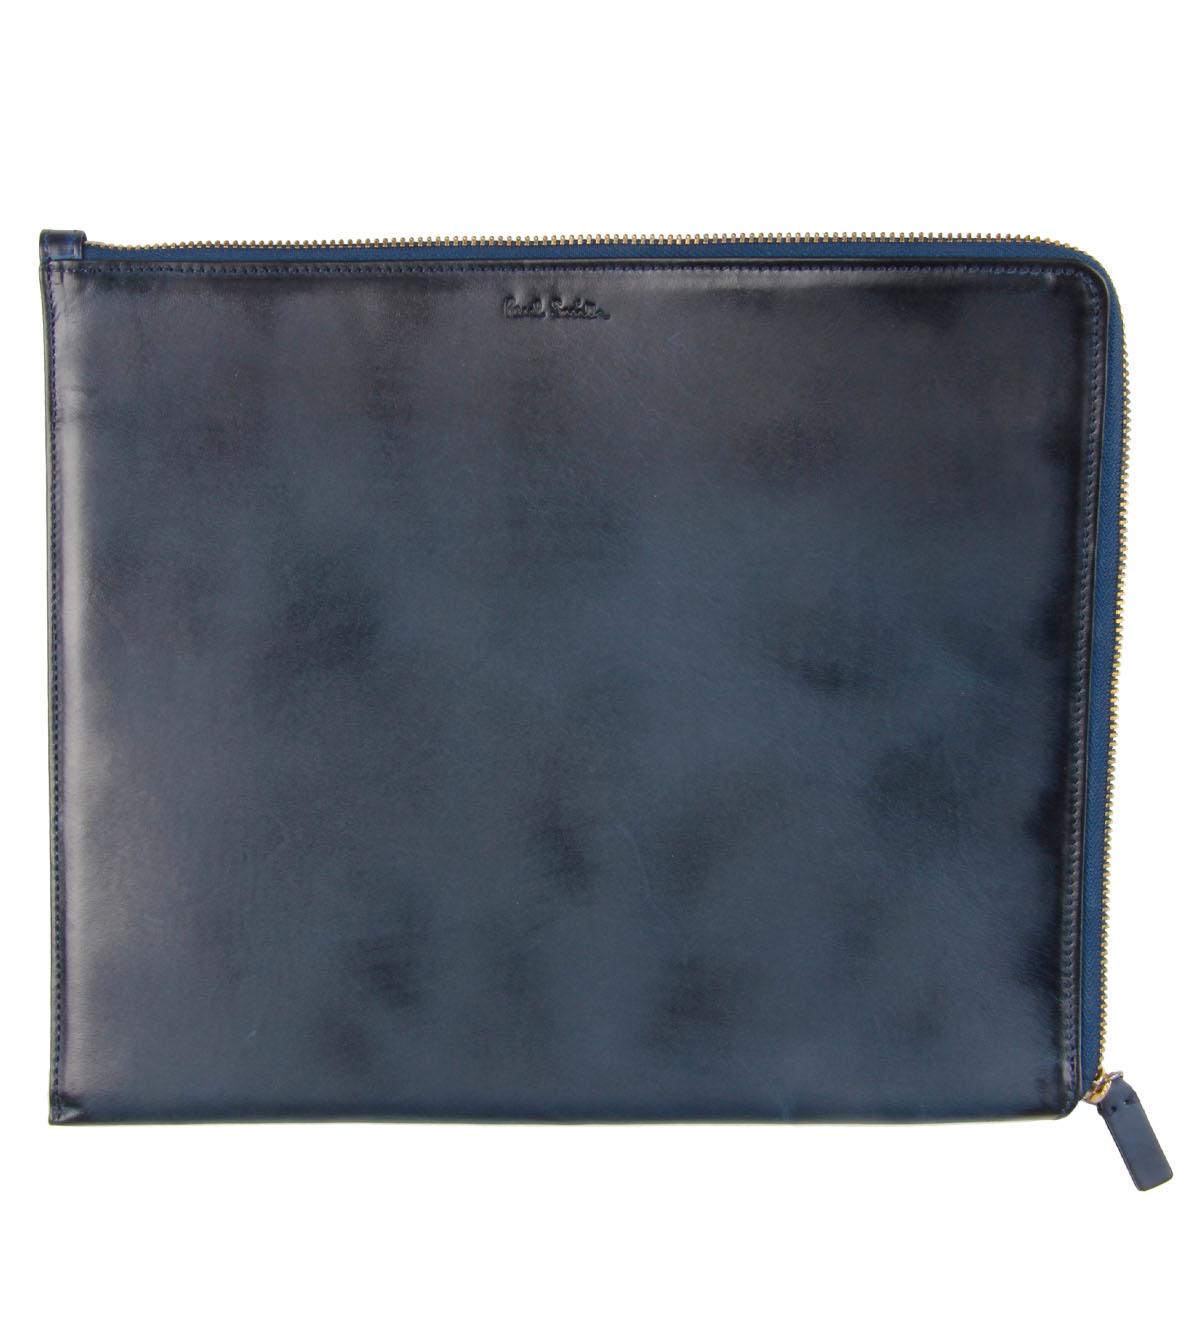 Foto Paul Smith Accessories Navy Leather Tablet Case foto 297133